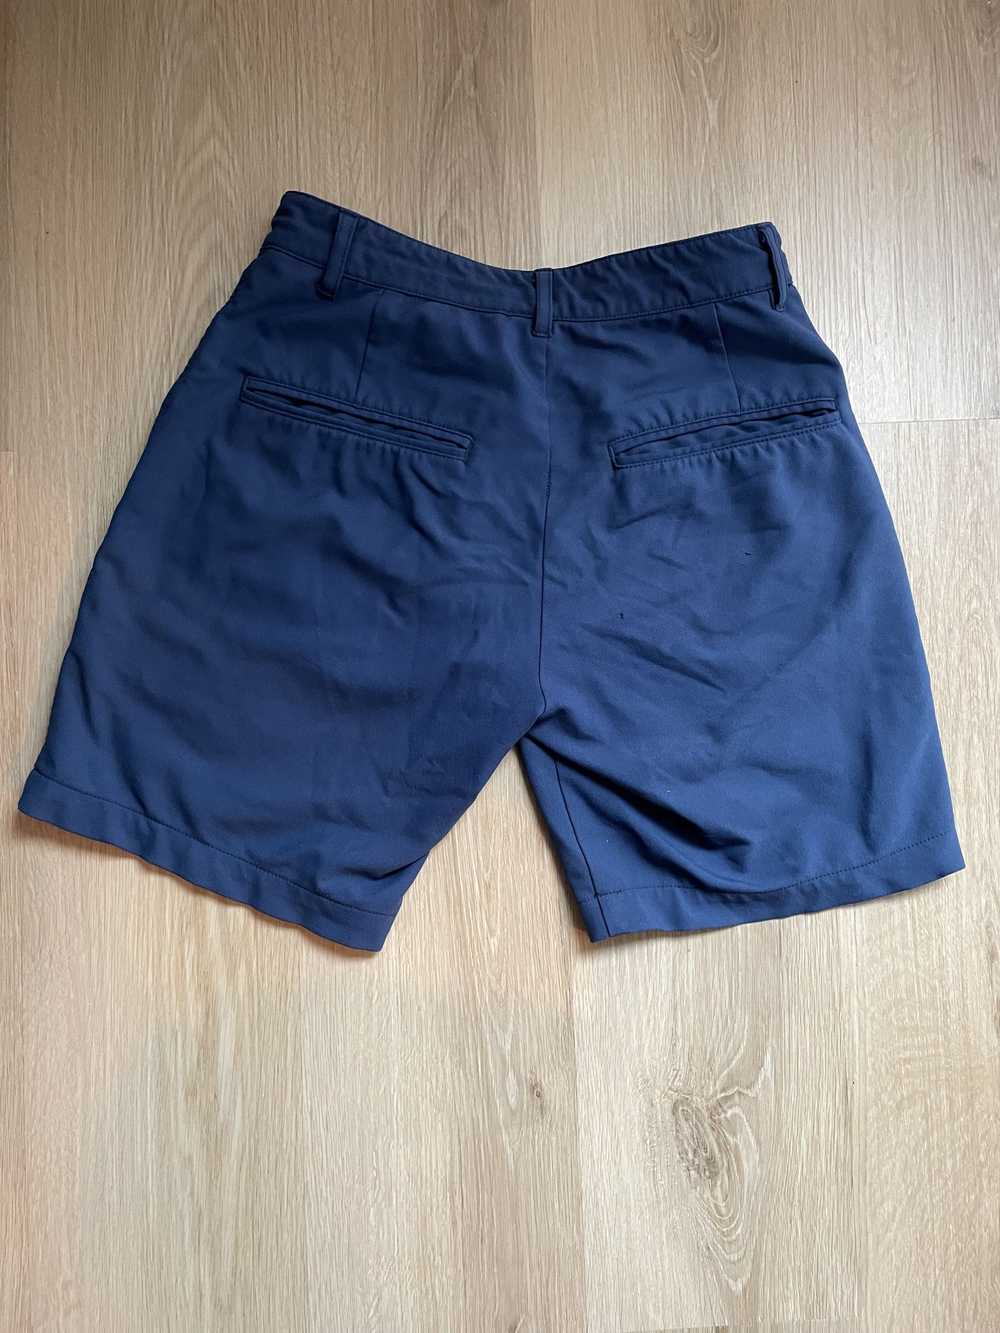 Outlier Outlier Three Way Shorts Navy Blue Men's … - image 7